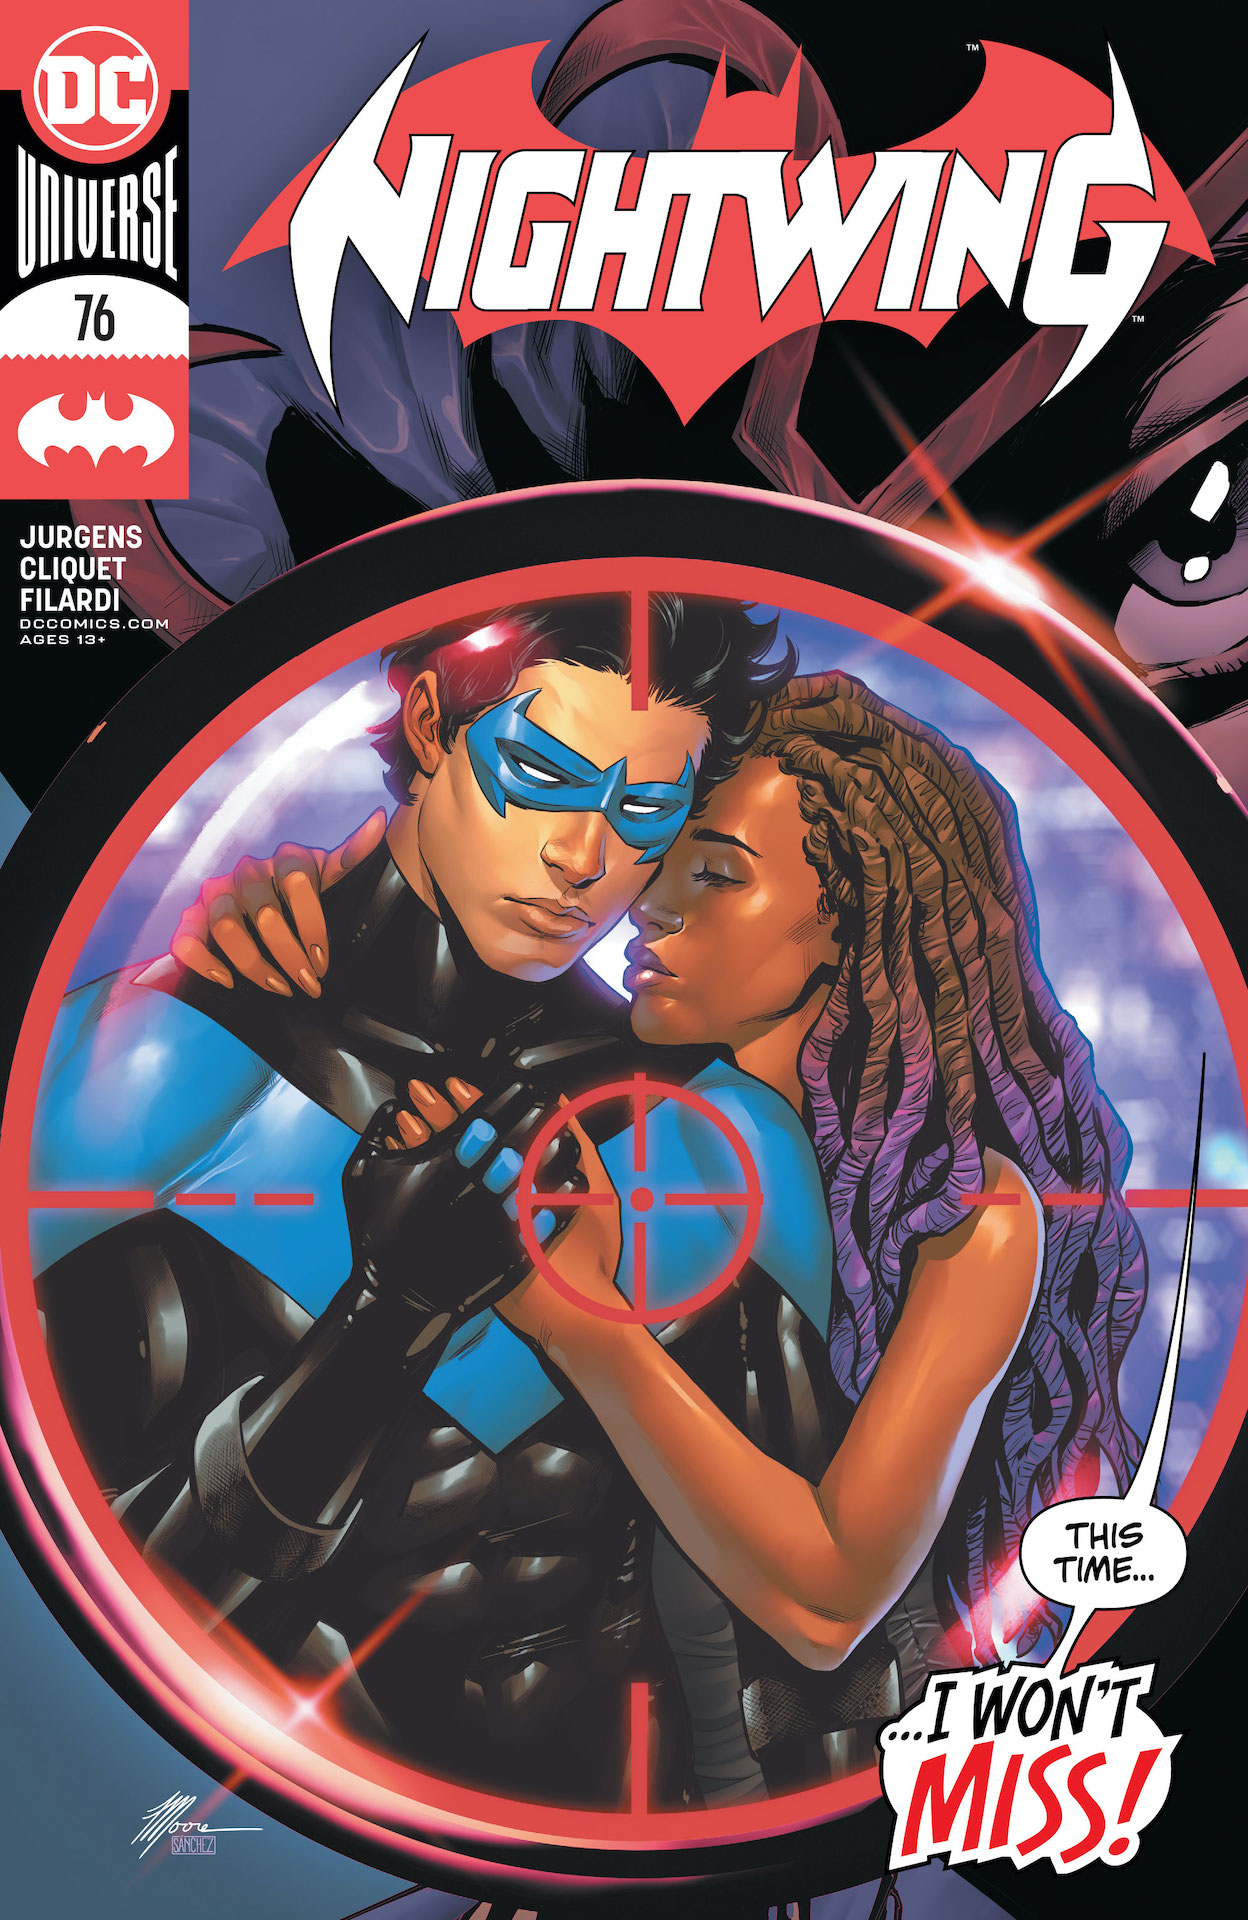 DC Preview: Nightwing #76